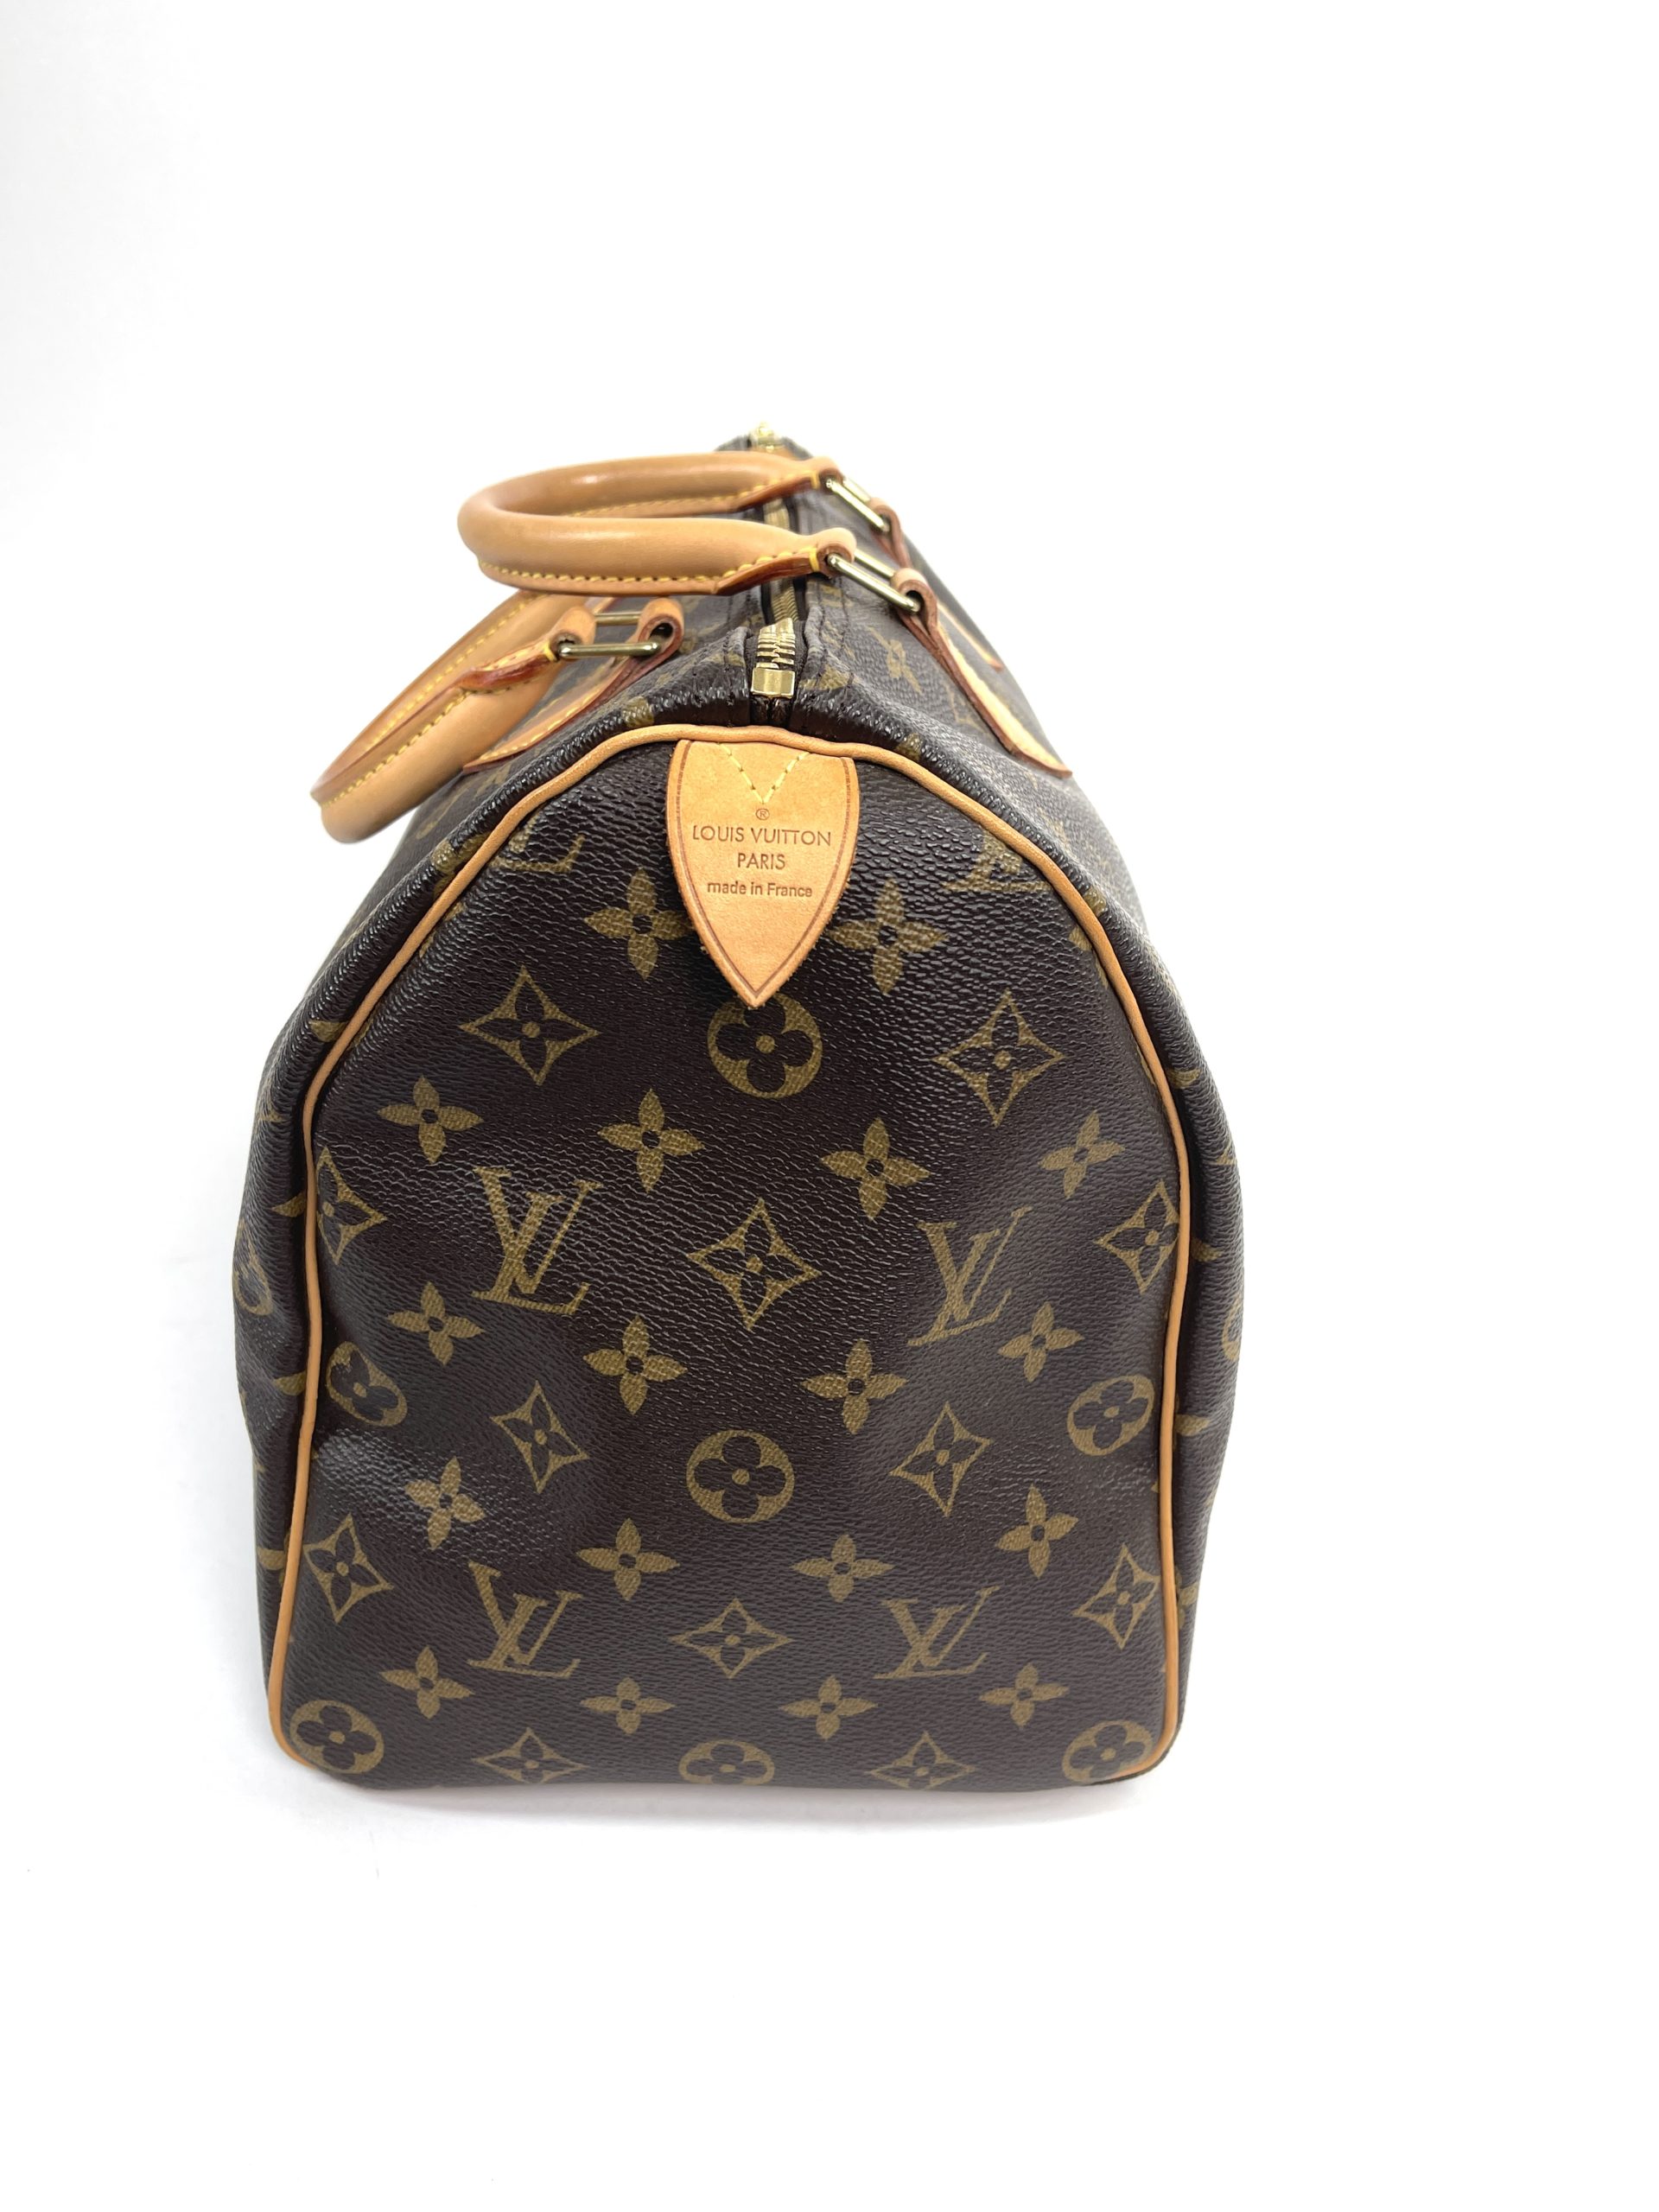 Louis Vuitton Damier Azur Speedy 35. Made in France. With Initials